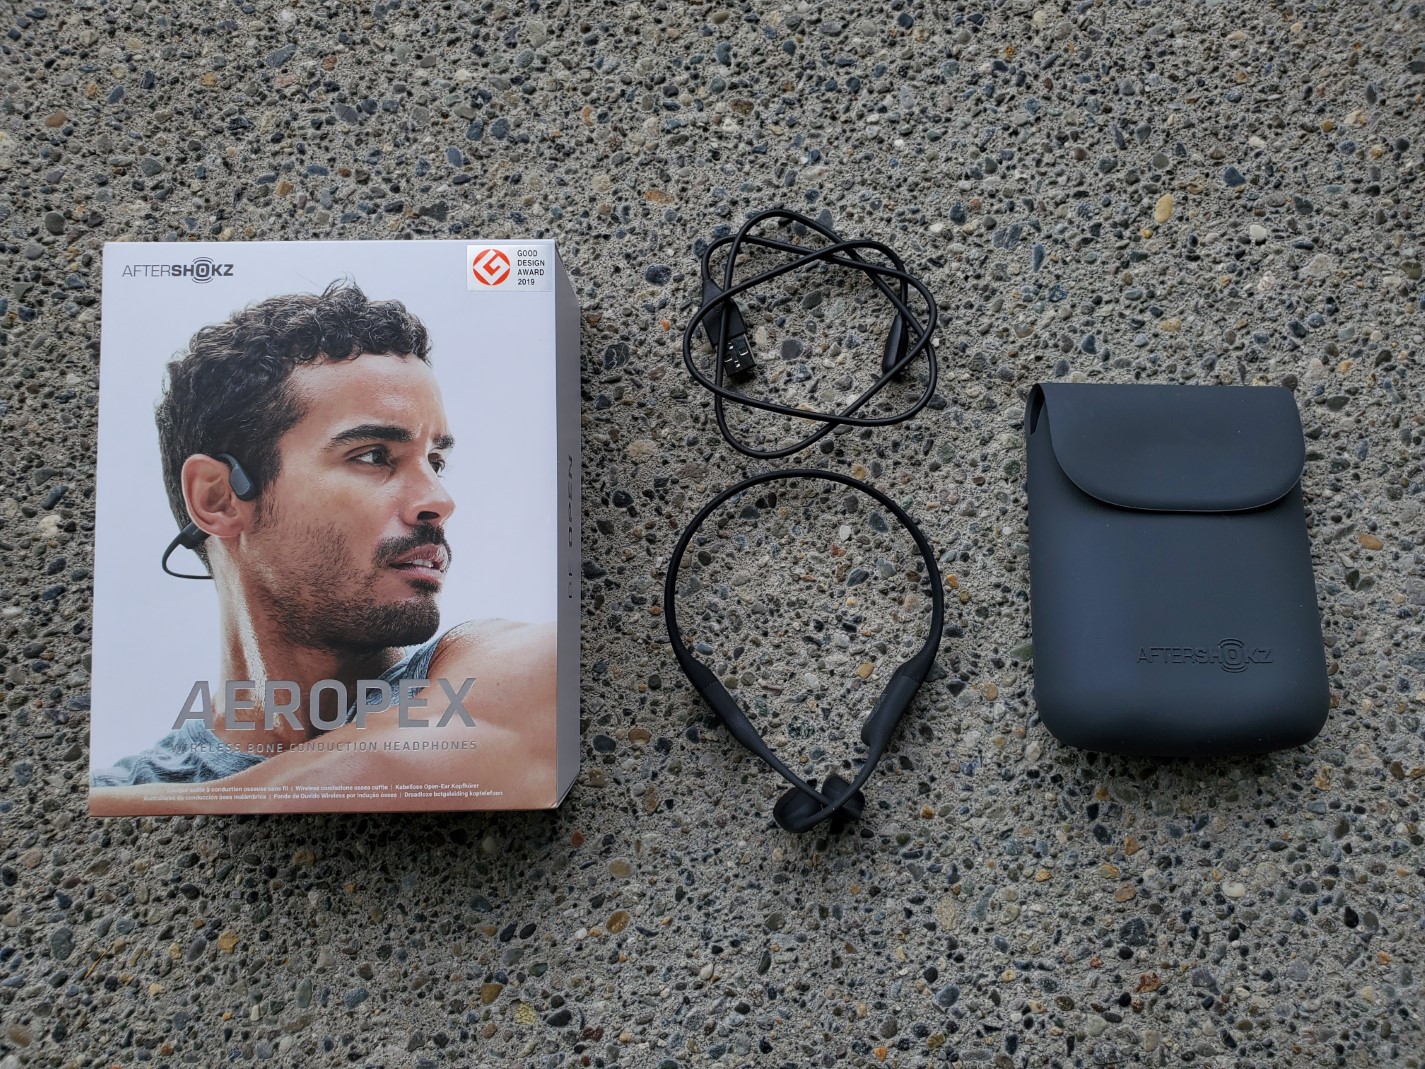 These Bone Conduction Headphones Improve Safety